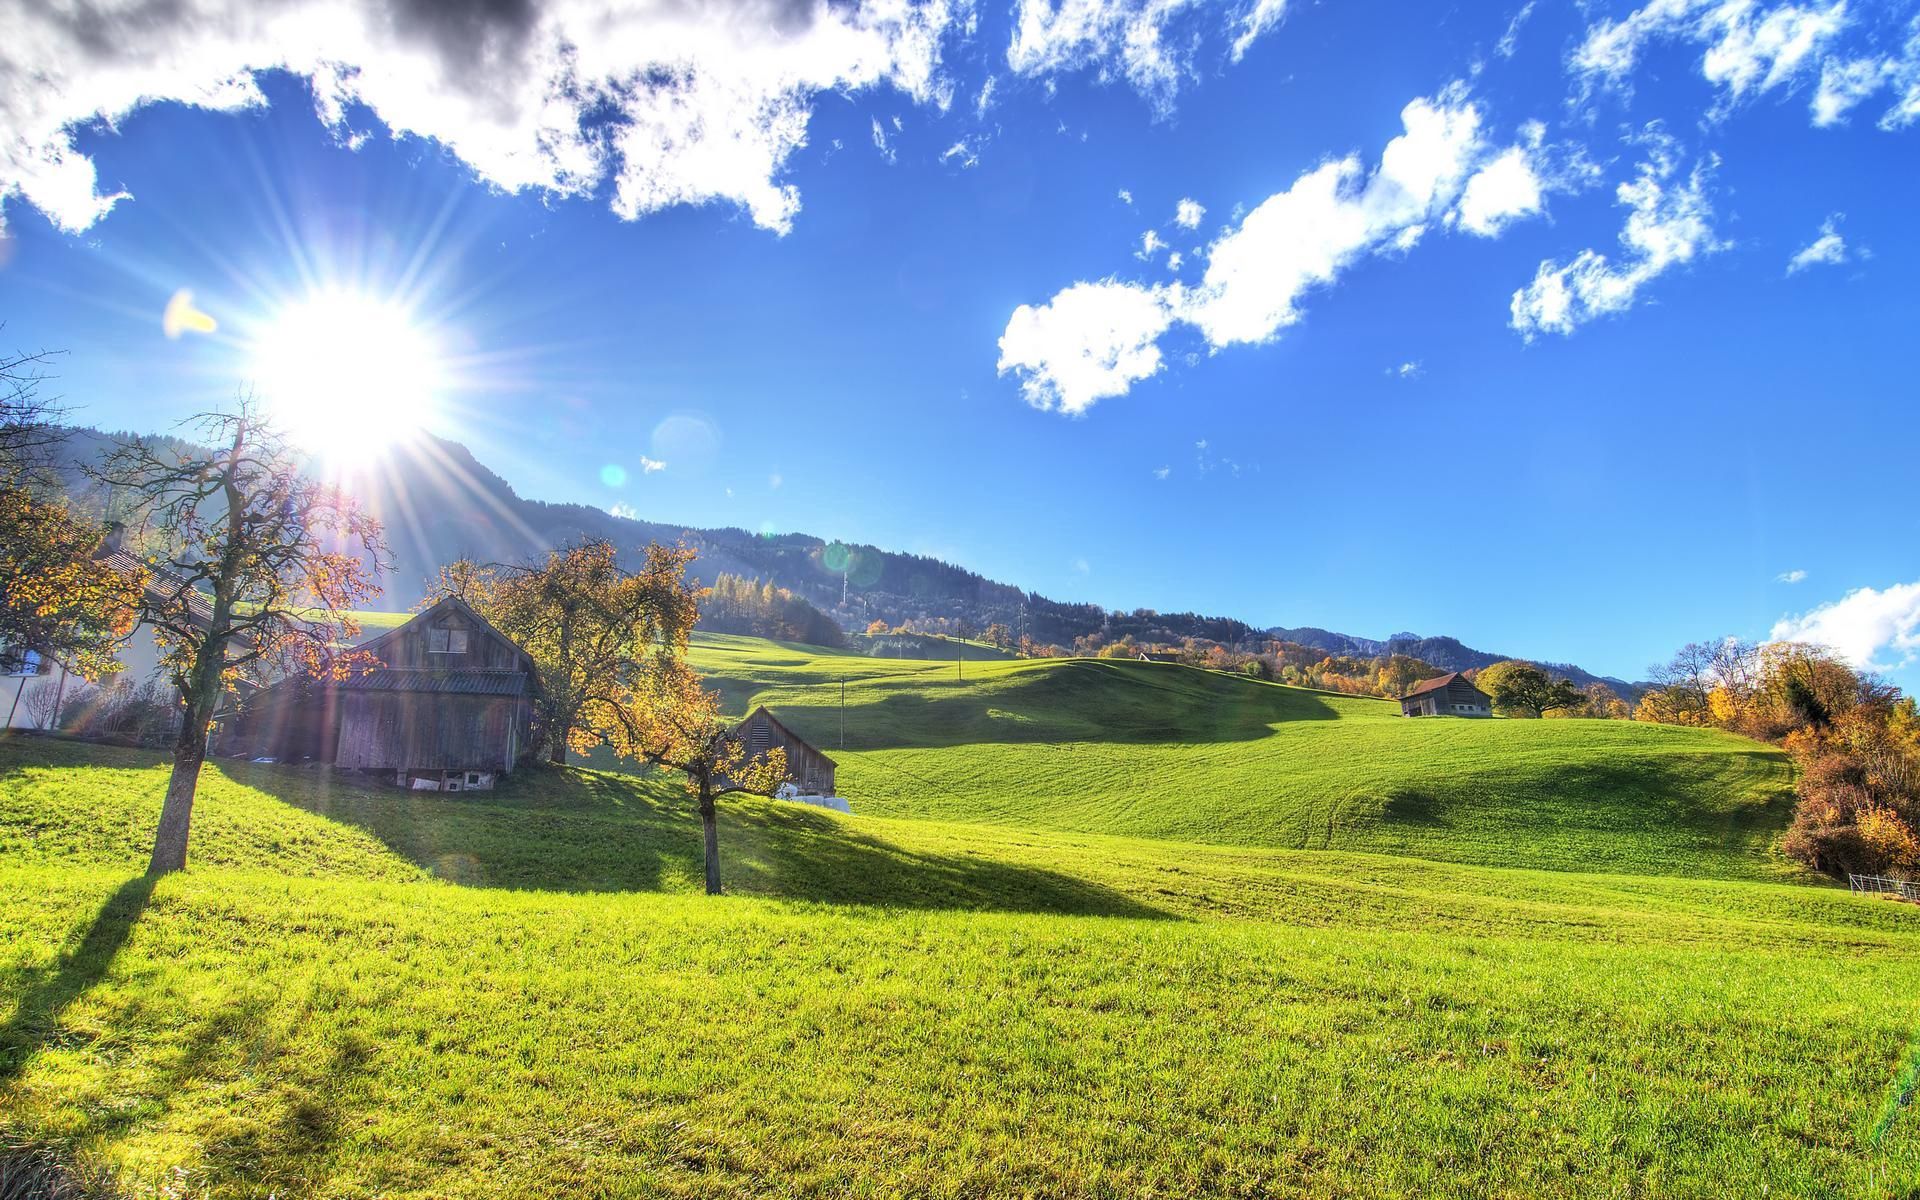 warmth, lawn, fields, shine, nature, autumn, sun, light, beams, rays, small house, lodge, heat, slopes, lawns, indian summer